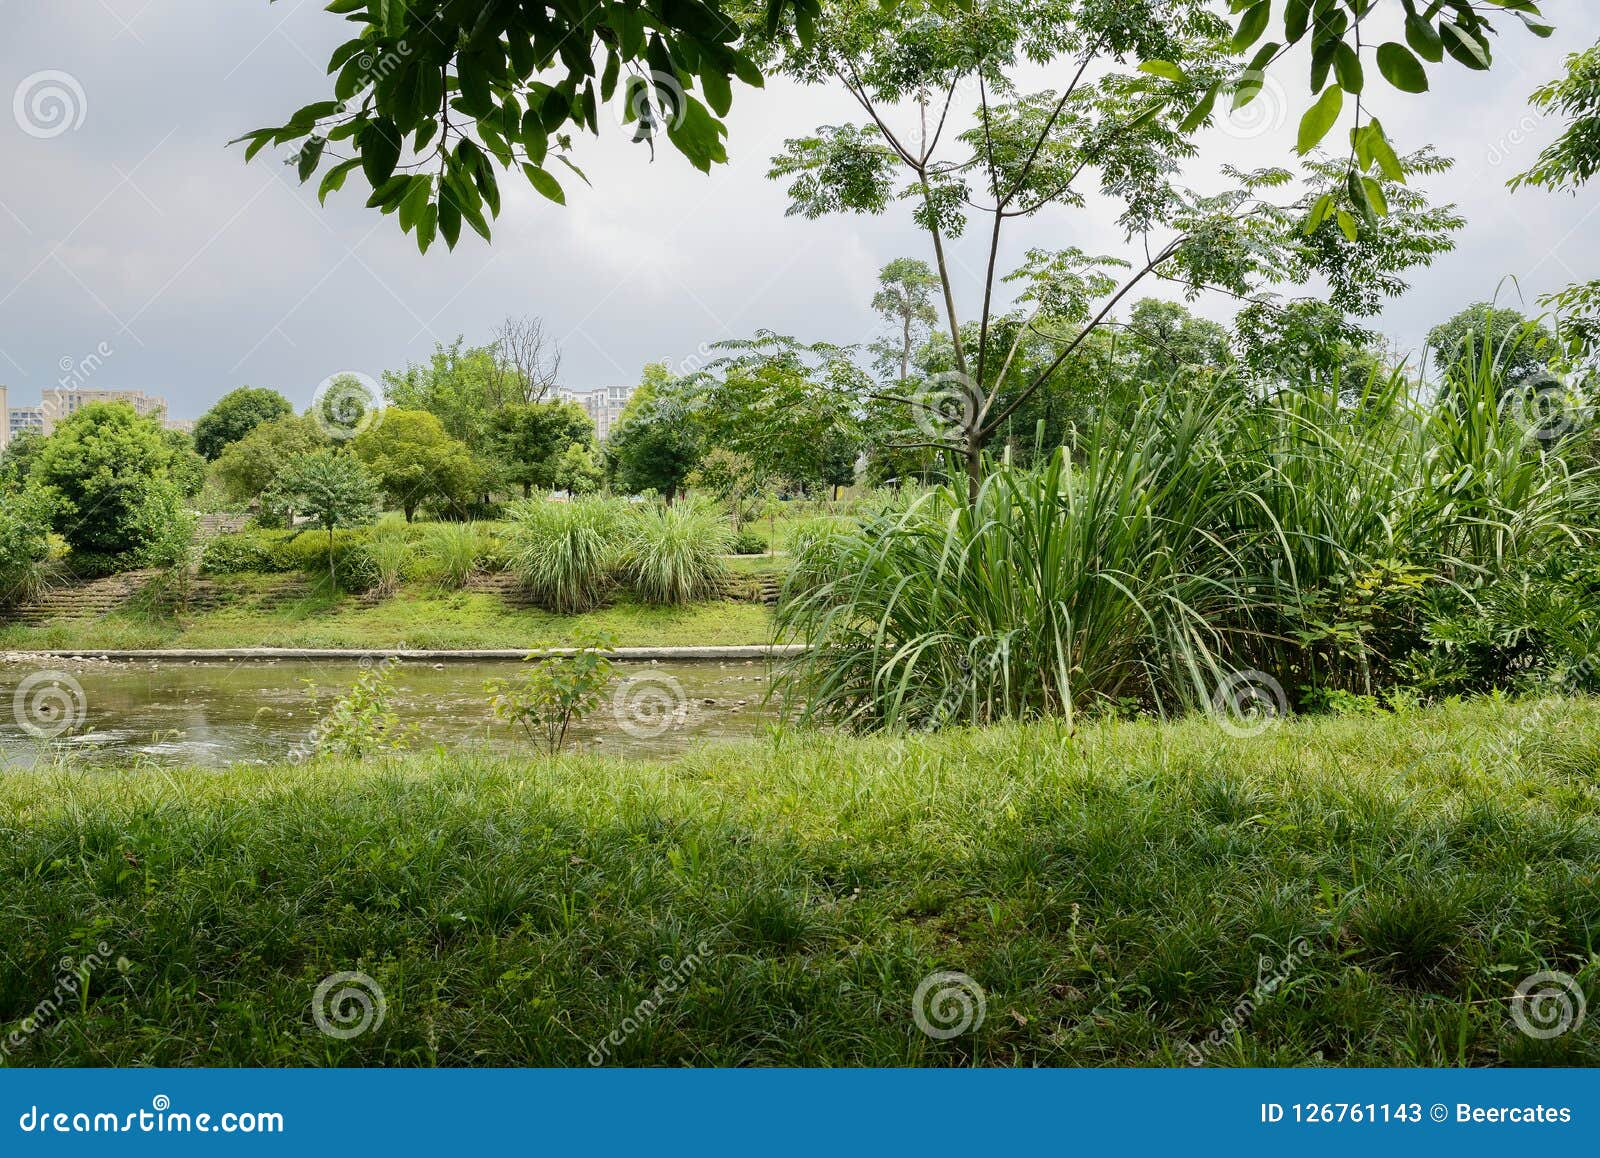 Shaded Grassy Riverside in City at Cloudy Summer Noon Stock Image ...